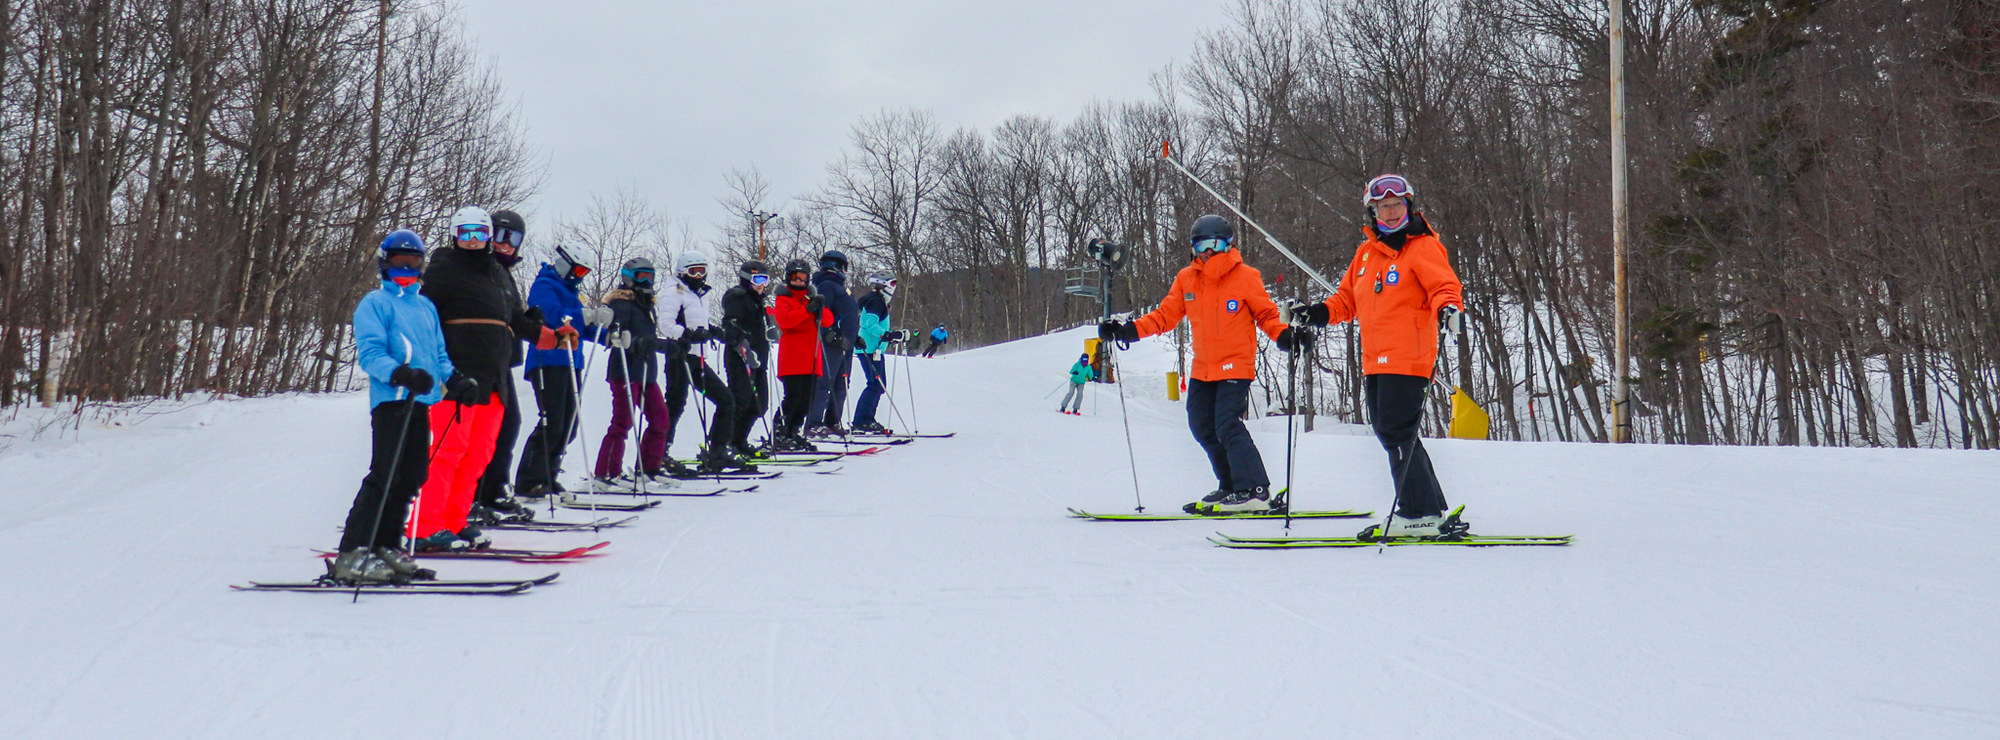 Two ski instructors talk to their class